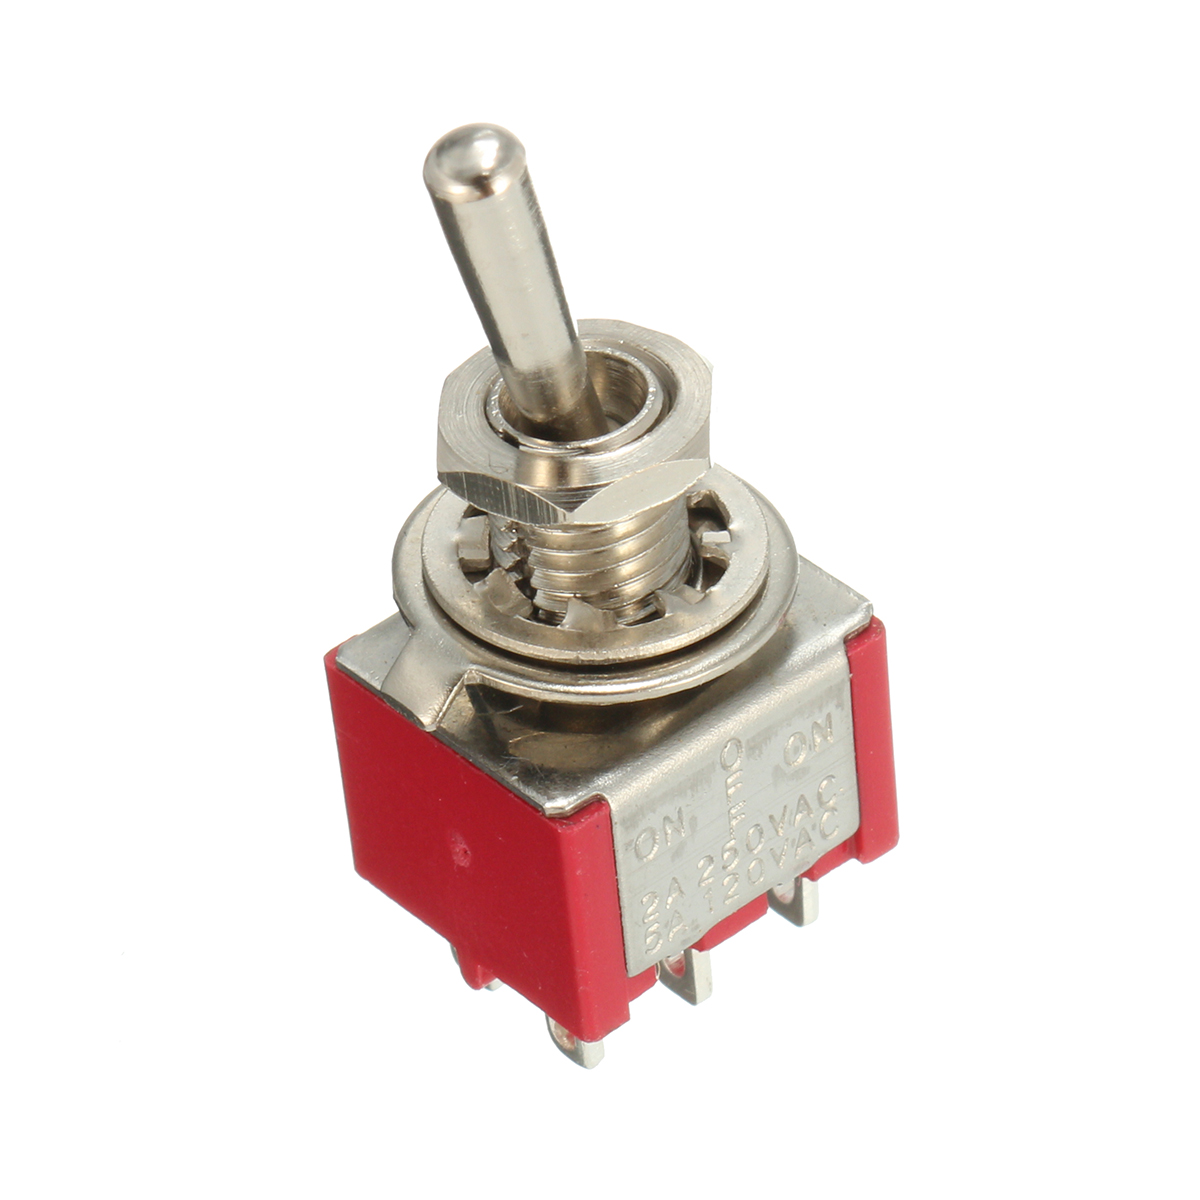 Red Miniature Toggle Switch DPDT On-Off-On 6 Pins 3 Position 5A 120Vac /2A 250Vac